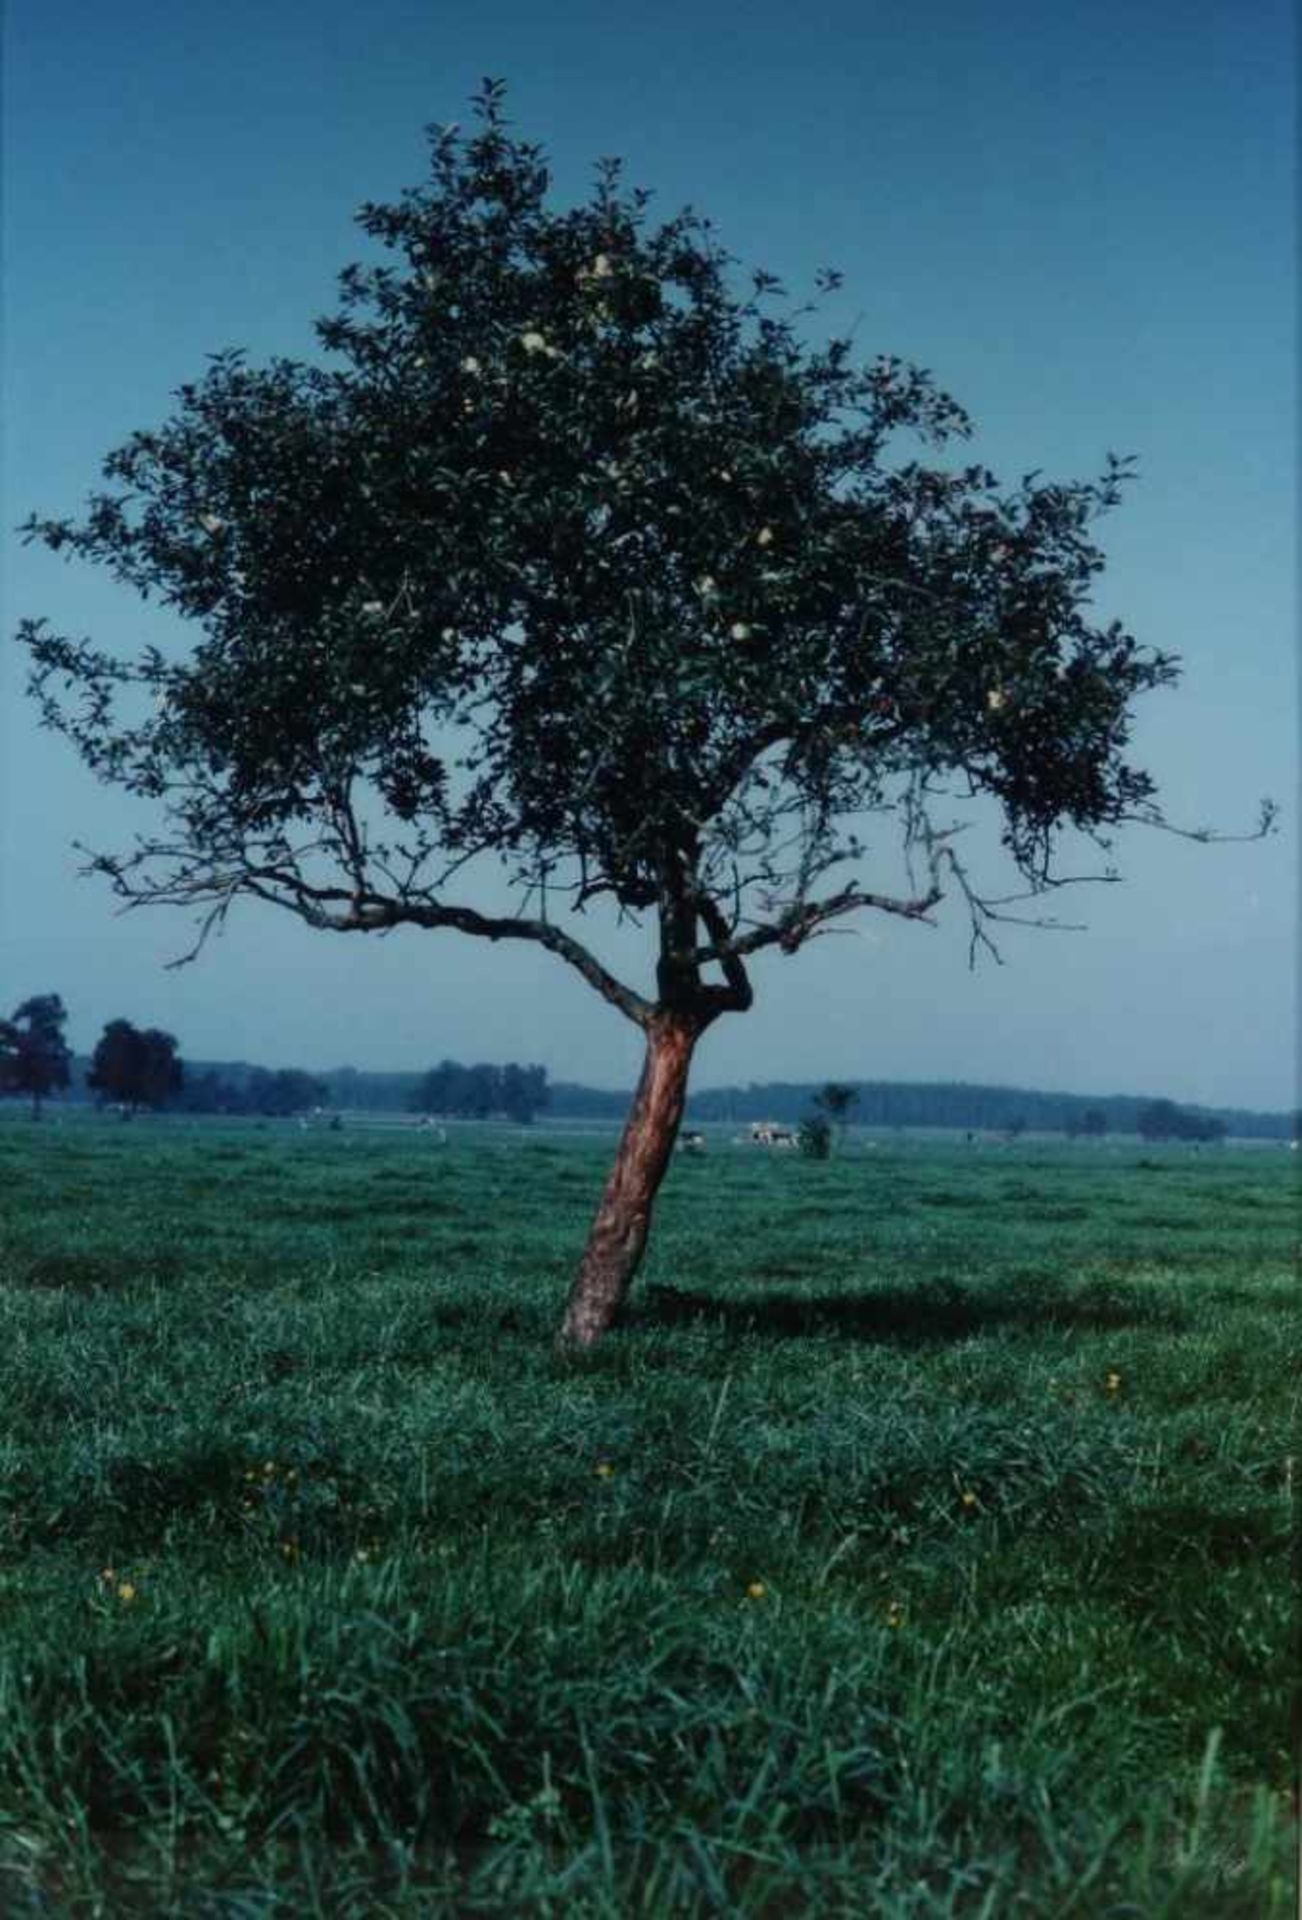 Huf, Paul (1924-2002), apple tree, photograph 70 x 100 cm. From the series: Vincent van Gogh/Paul